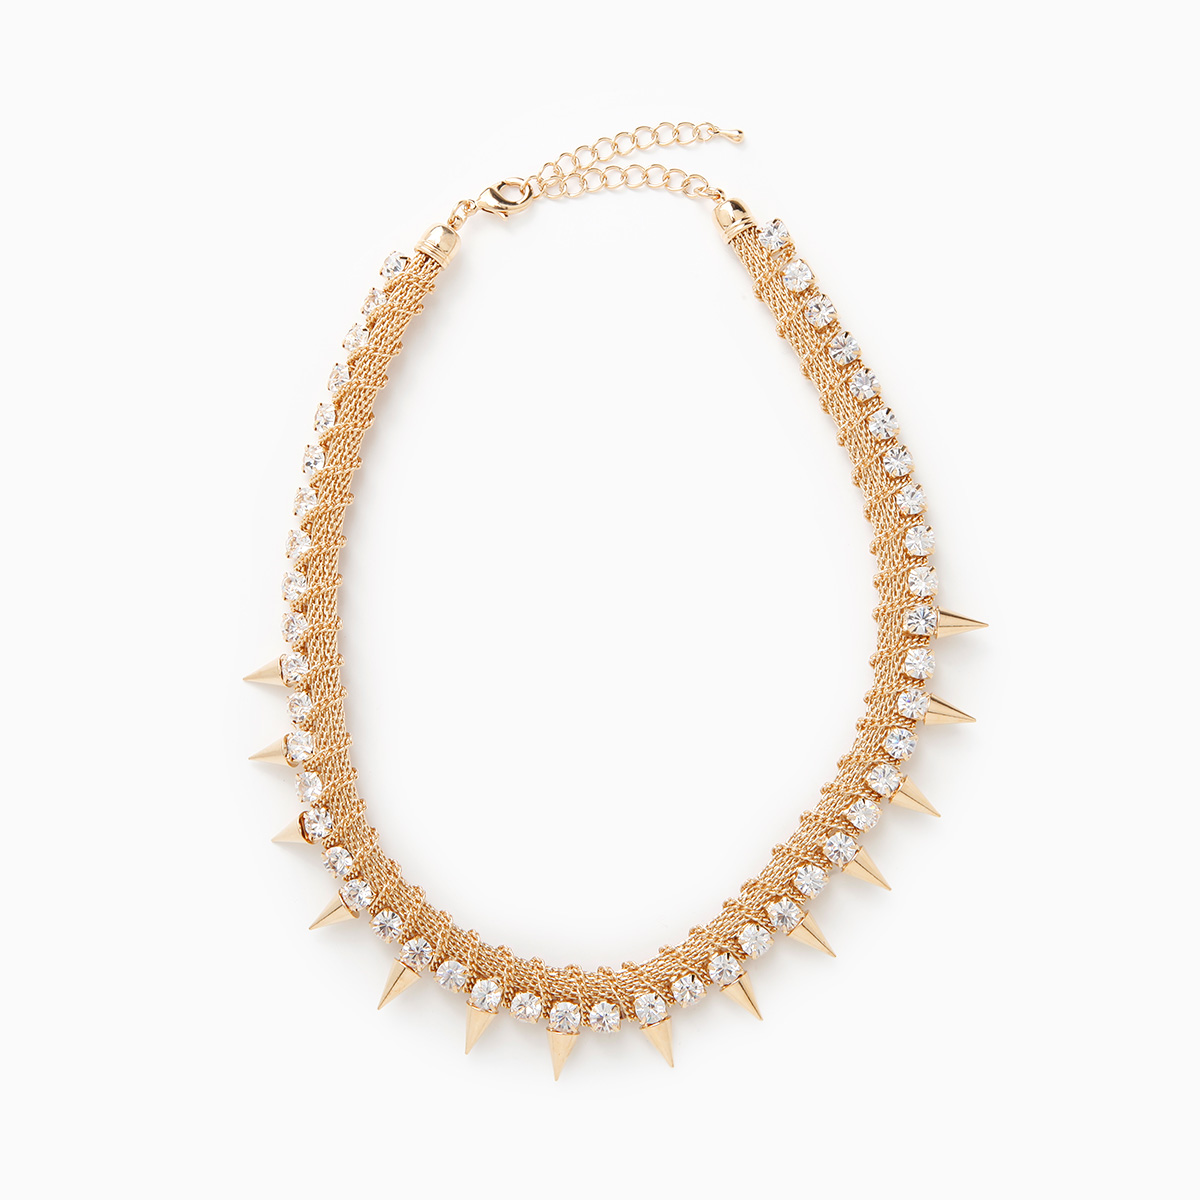 Punk Princess Necklace in Gold | DAILYLOOK